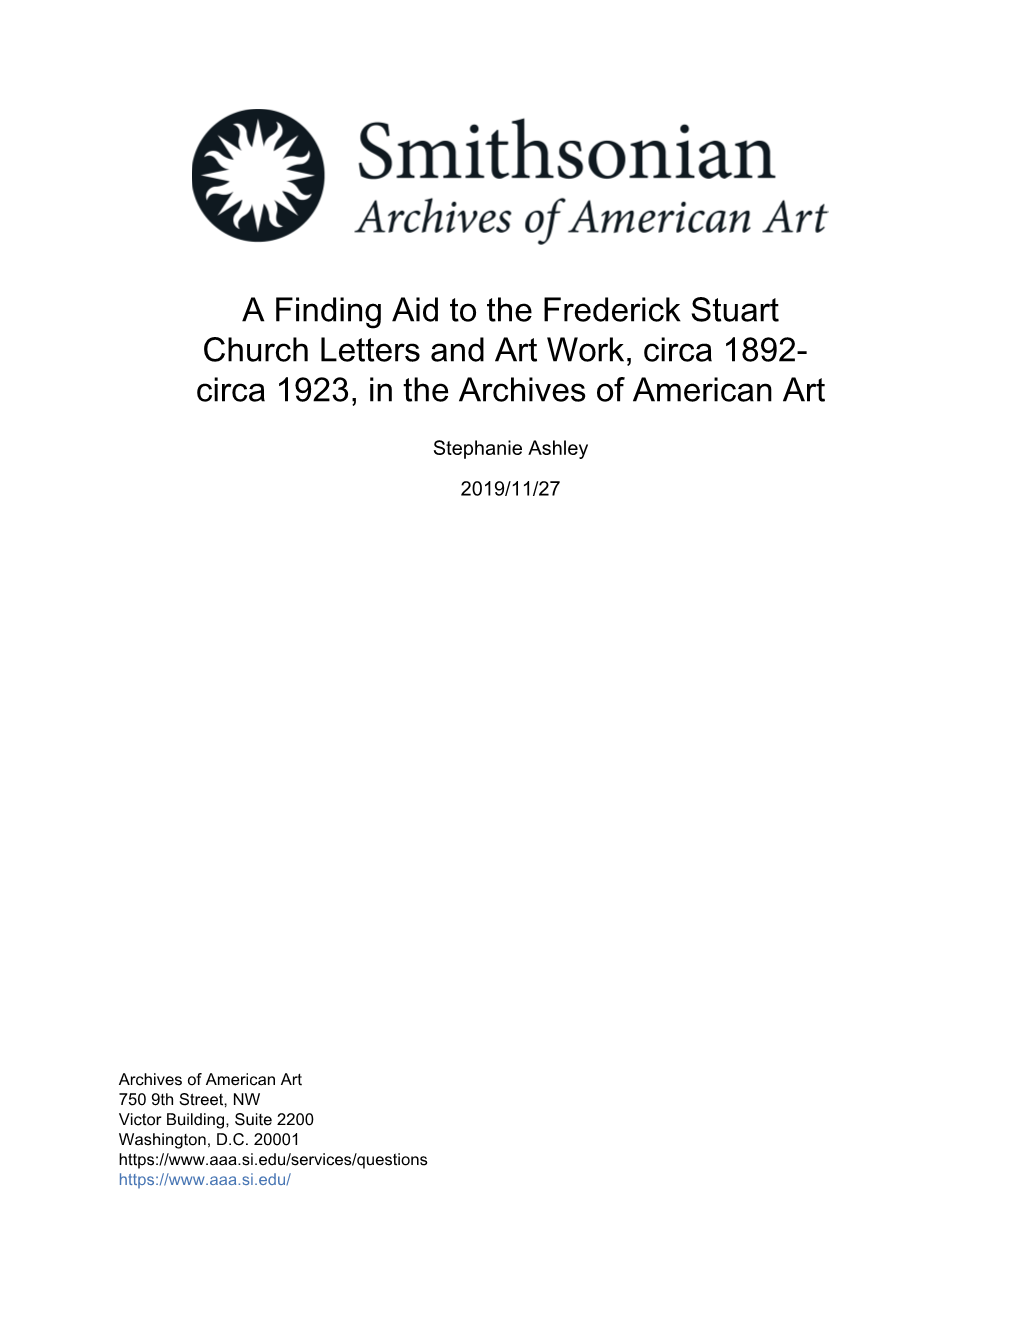 A Finding Aid to the Frederick Stuart Church Letters and Art Work, Circa 1892- Circa 1923, in the Archives of American Art